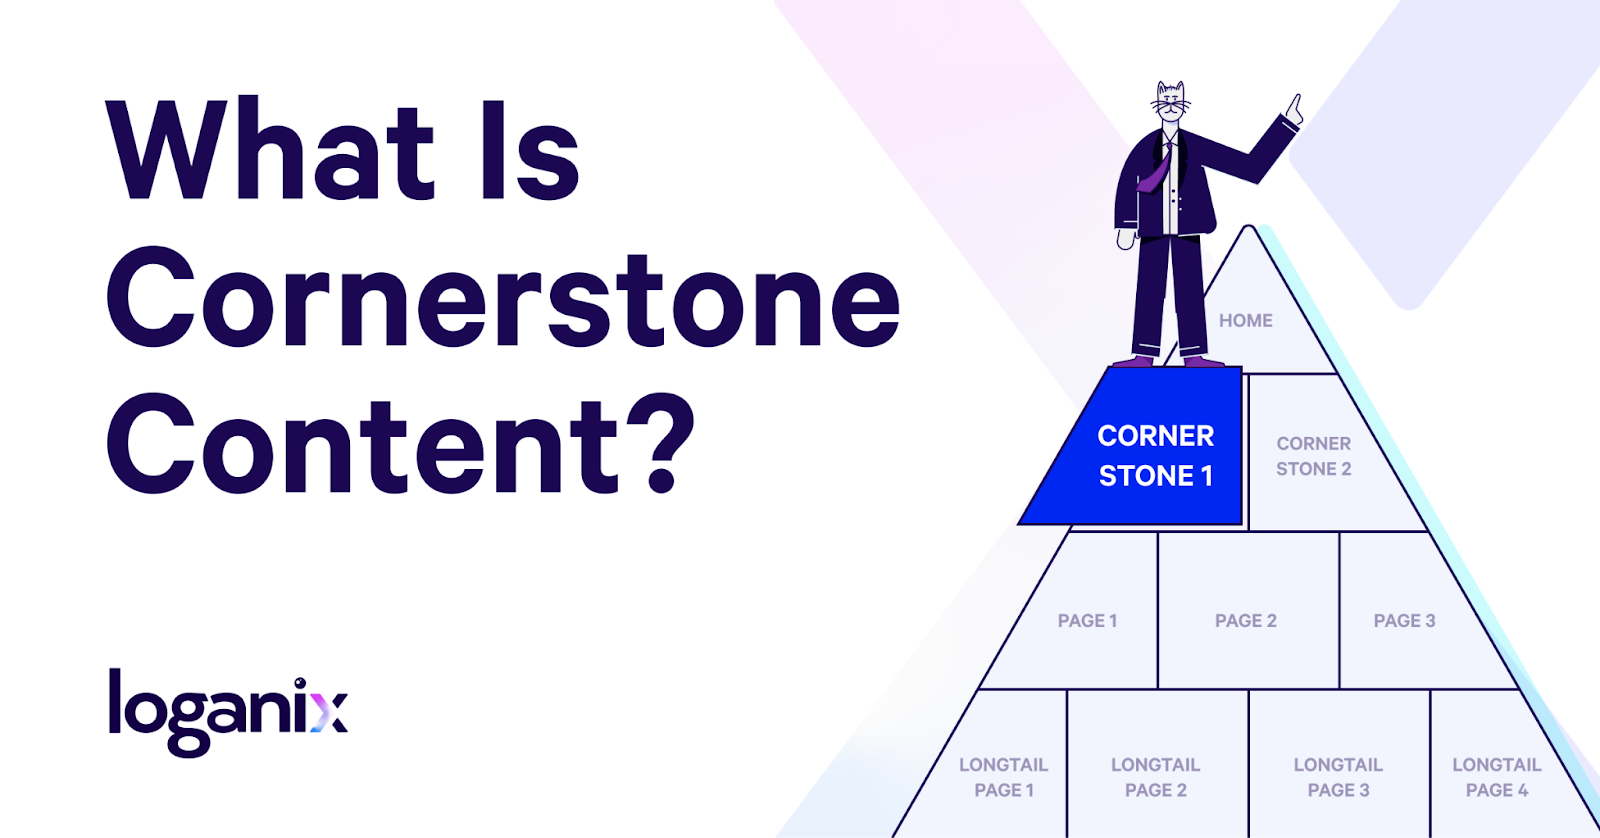 What Is Cornerstone Content?